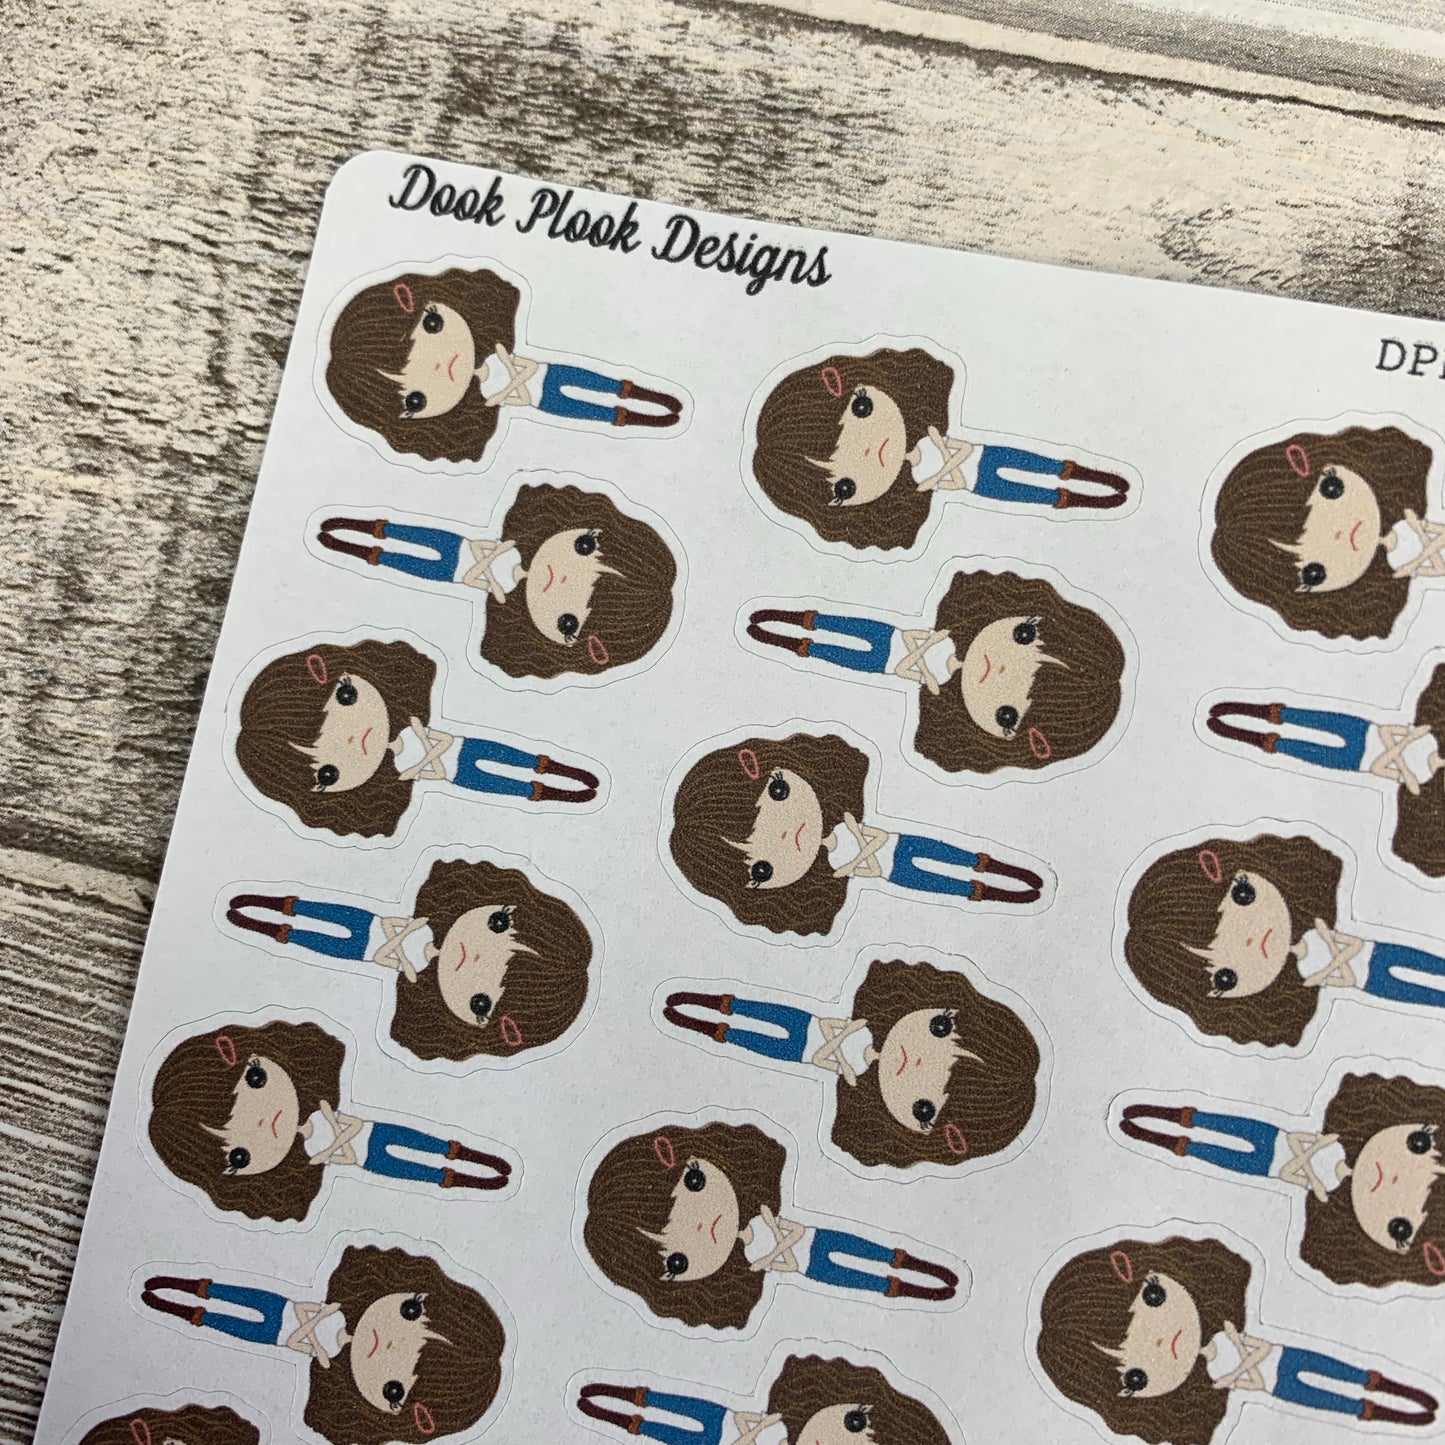 White Woman - Nope Stickers (DPD1415)